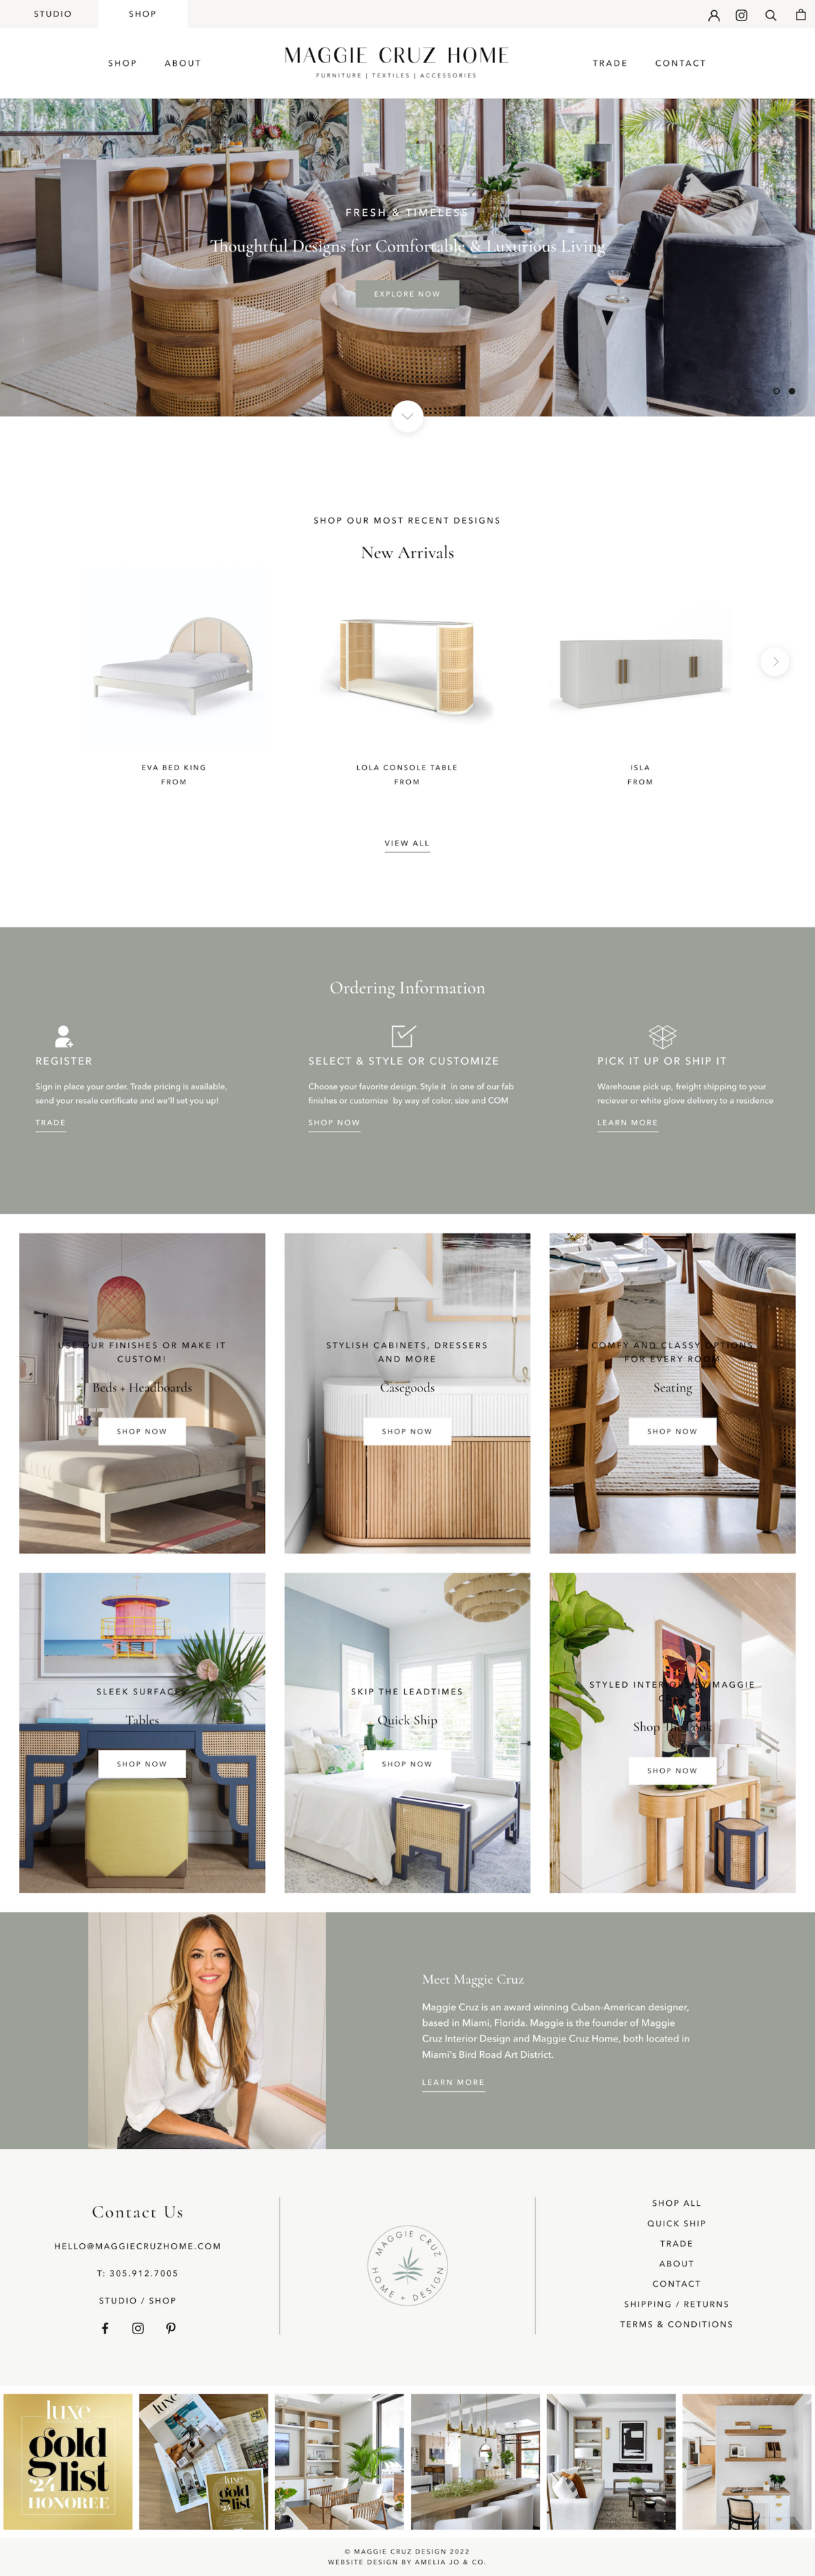 Homepage website design for Maggie Cruz Home featuring luxurious, modern furniture with Cuban influence